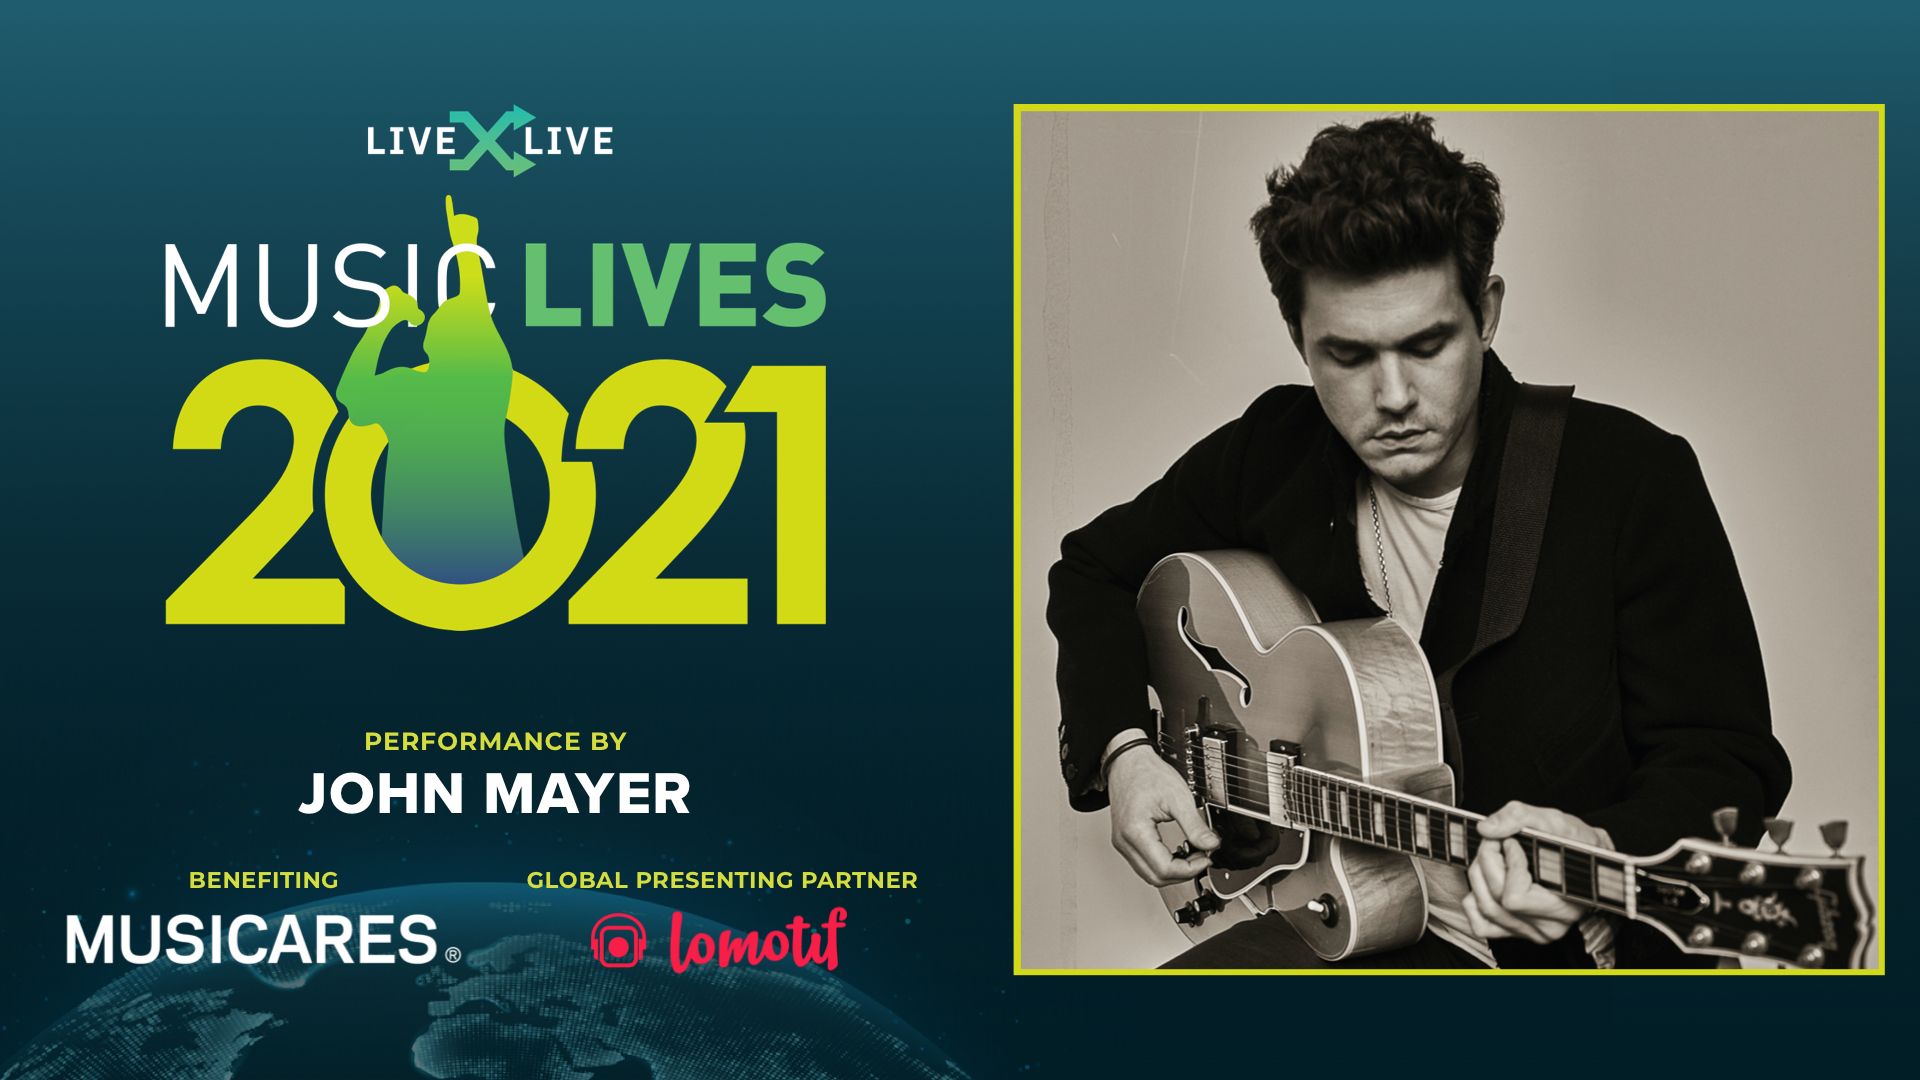 Tonight: John Mayer to Perform during LiveXLive's 'Music Lives' Stream